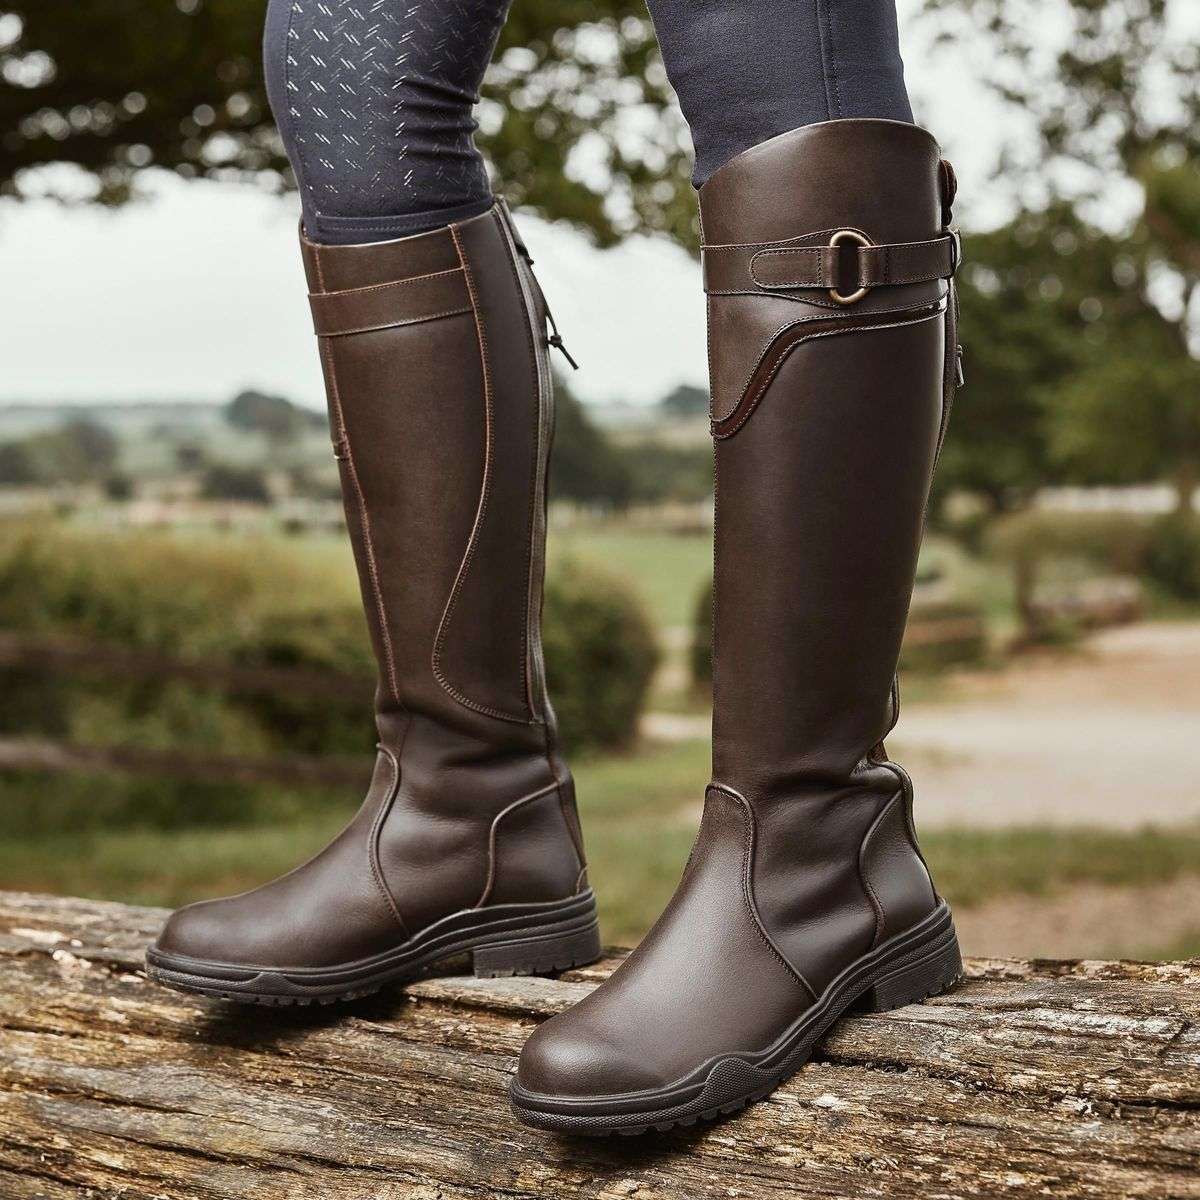 Dublin Calton Ladies' Waterproof Country Boots Leather with Patterned ...